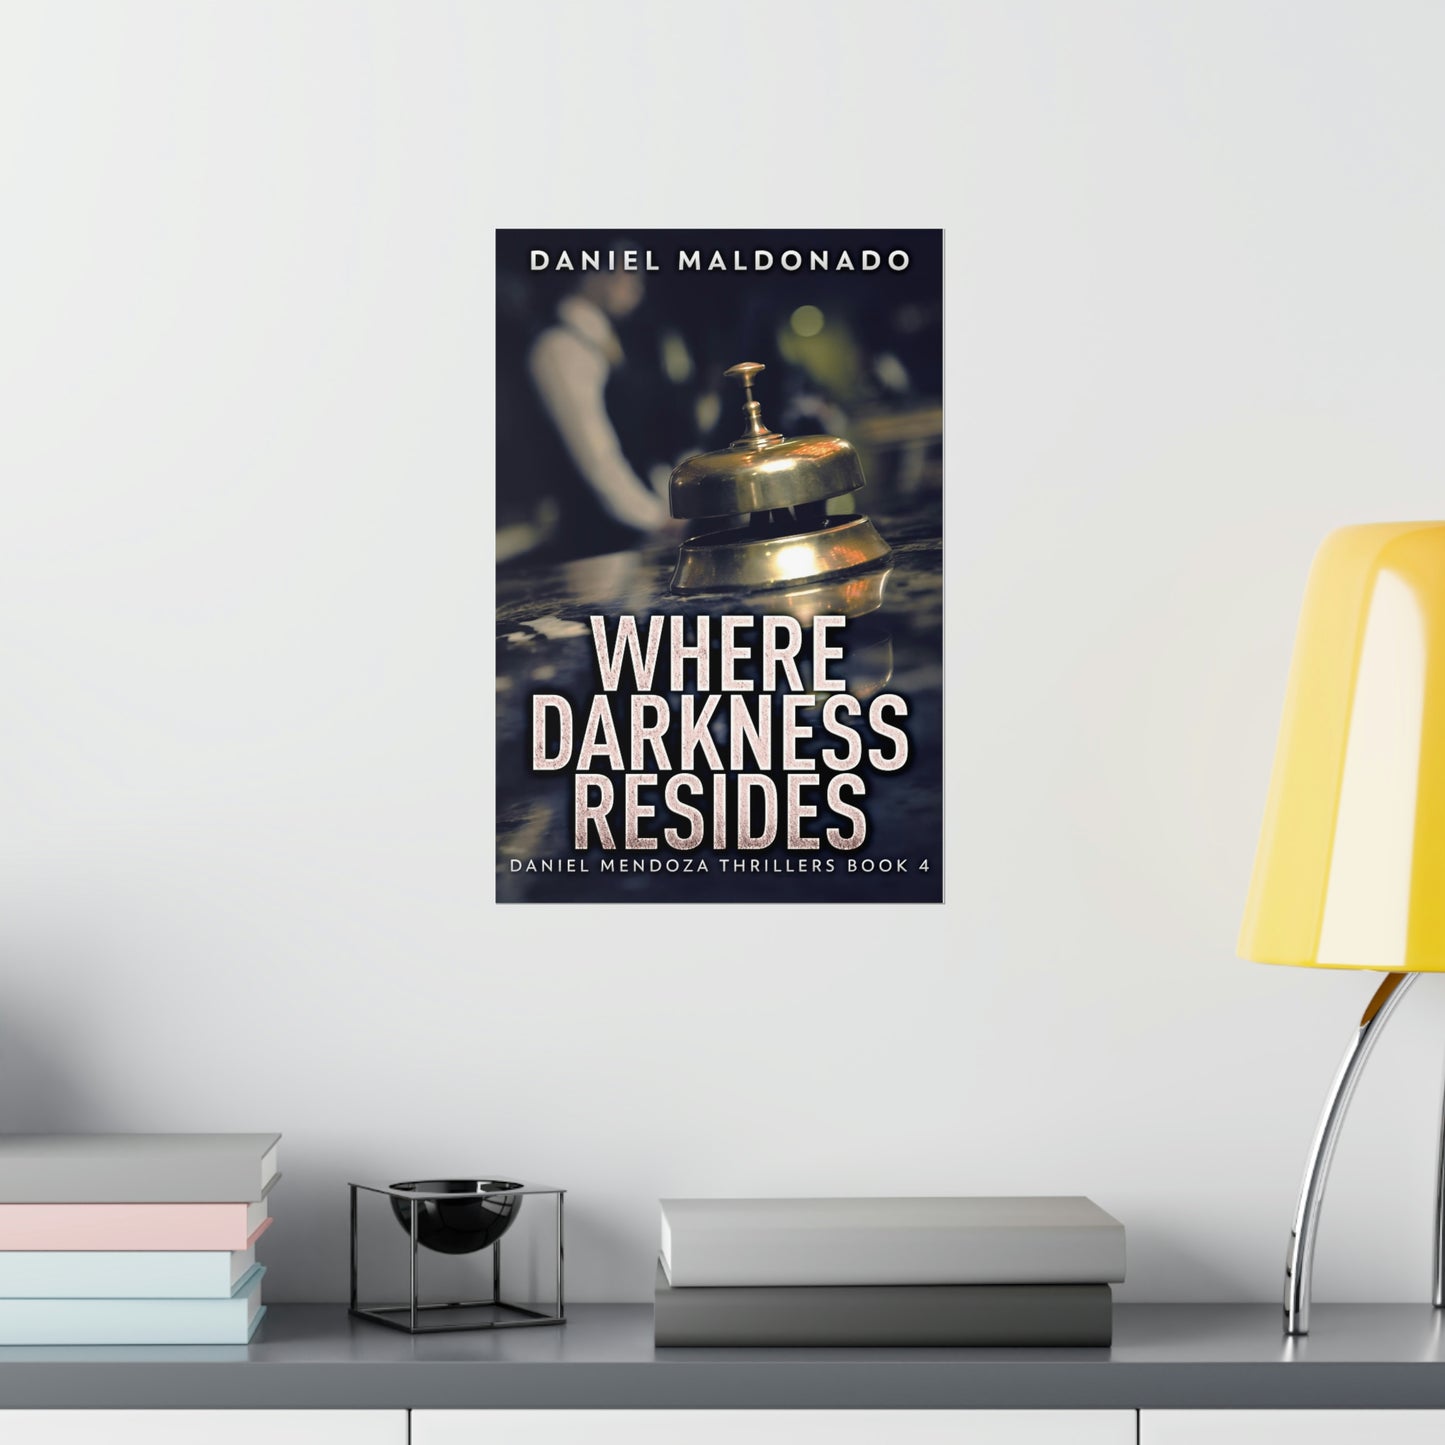 Where Darkness Resides - Matte Poster